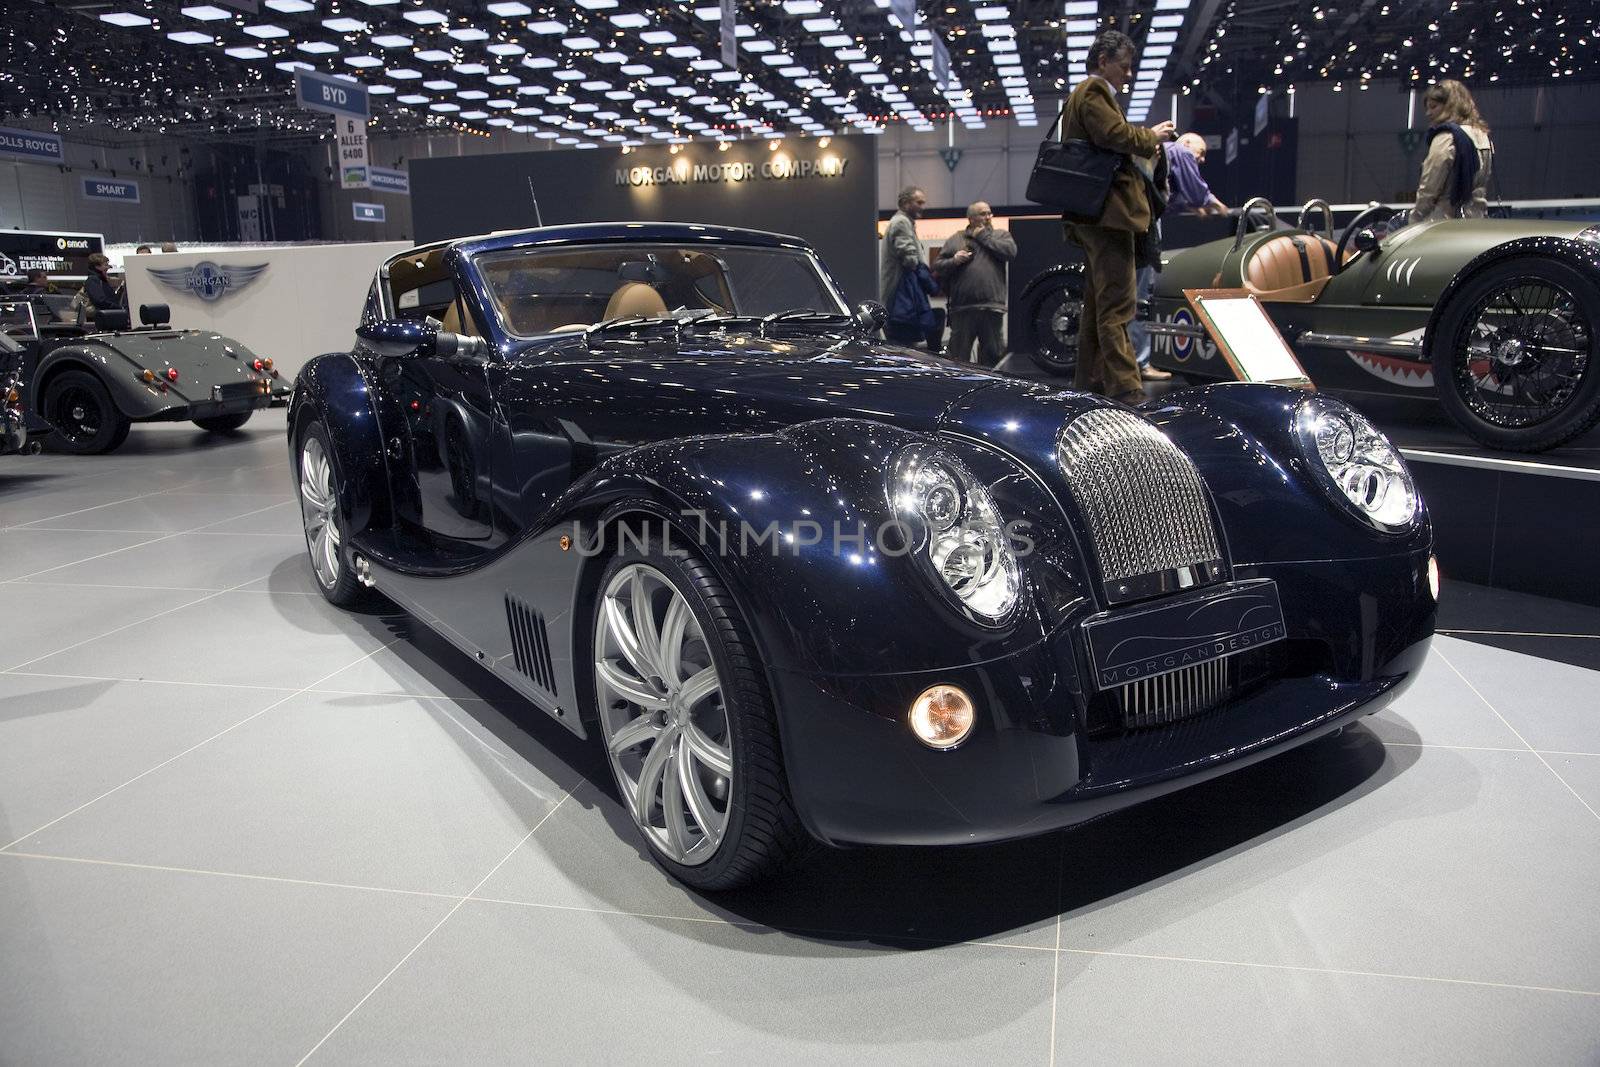 GENEVA, SWITZERLAND - MARCH 4, 2011 - Morgan Aero SuperSports model is presented at the annual motor show in Geneva on March 4, 2011.